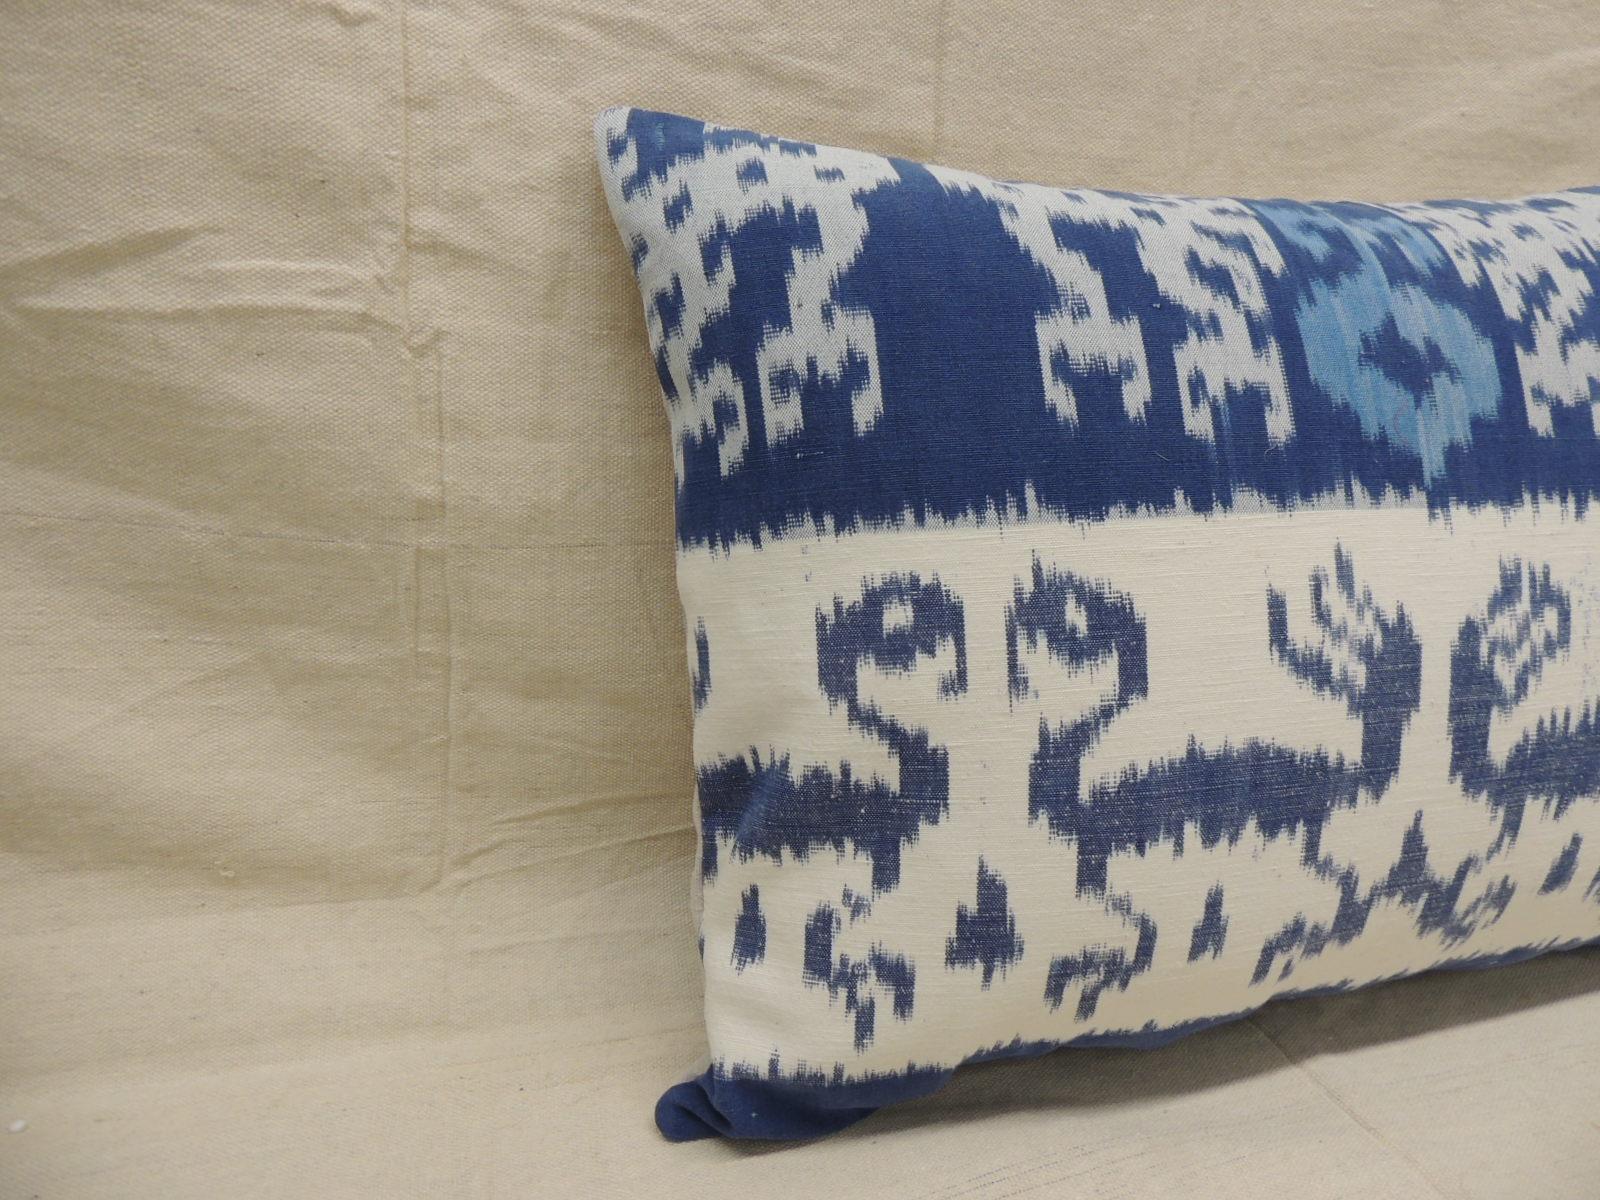 Vintage blue and white ikat decorative bolster pillow.
Greyish woven cotton backing.
Decorative pillow handcrafted and designed in the USA.
Closure by stitch (no zipper closure) with custom made pillow insert.
Size: 15